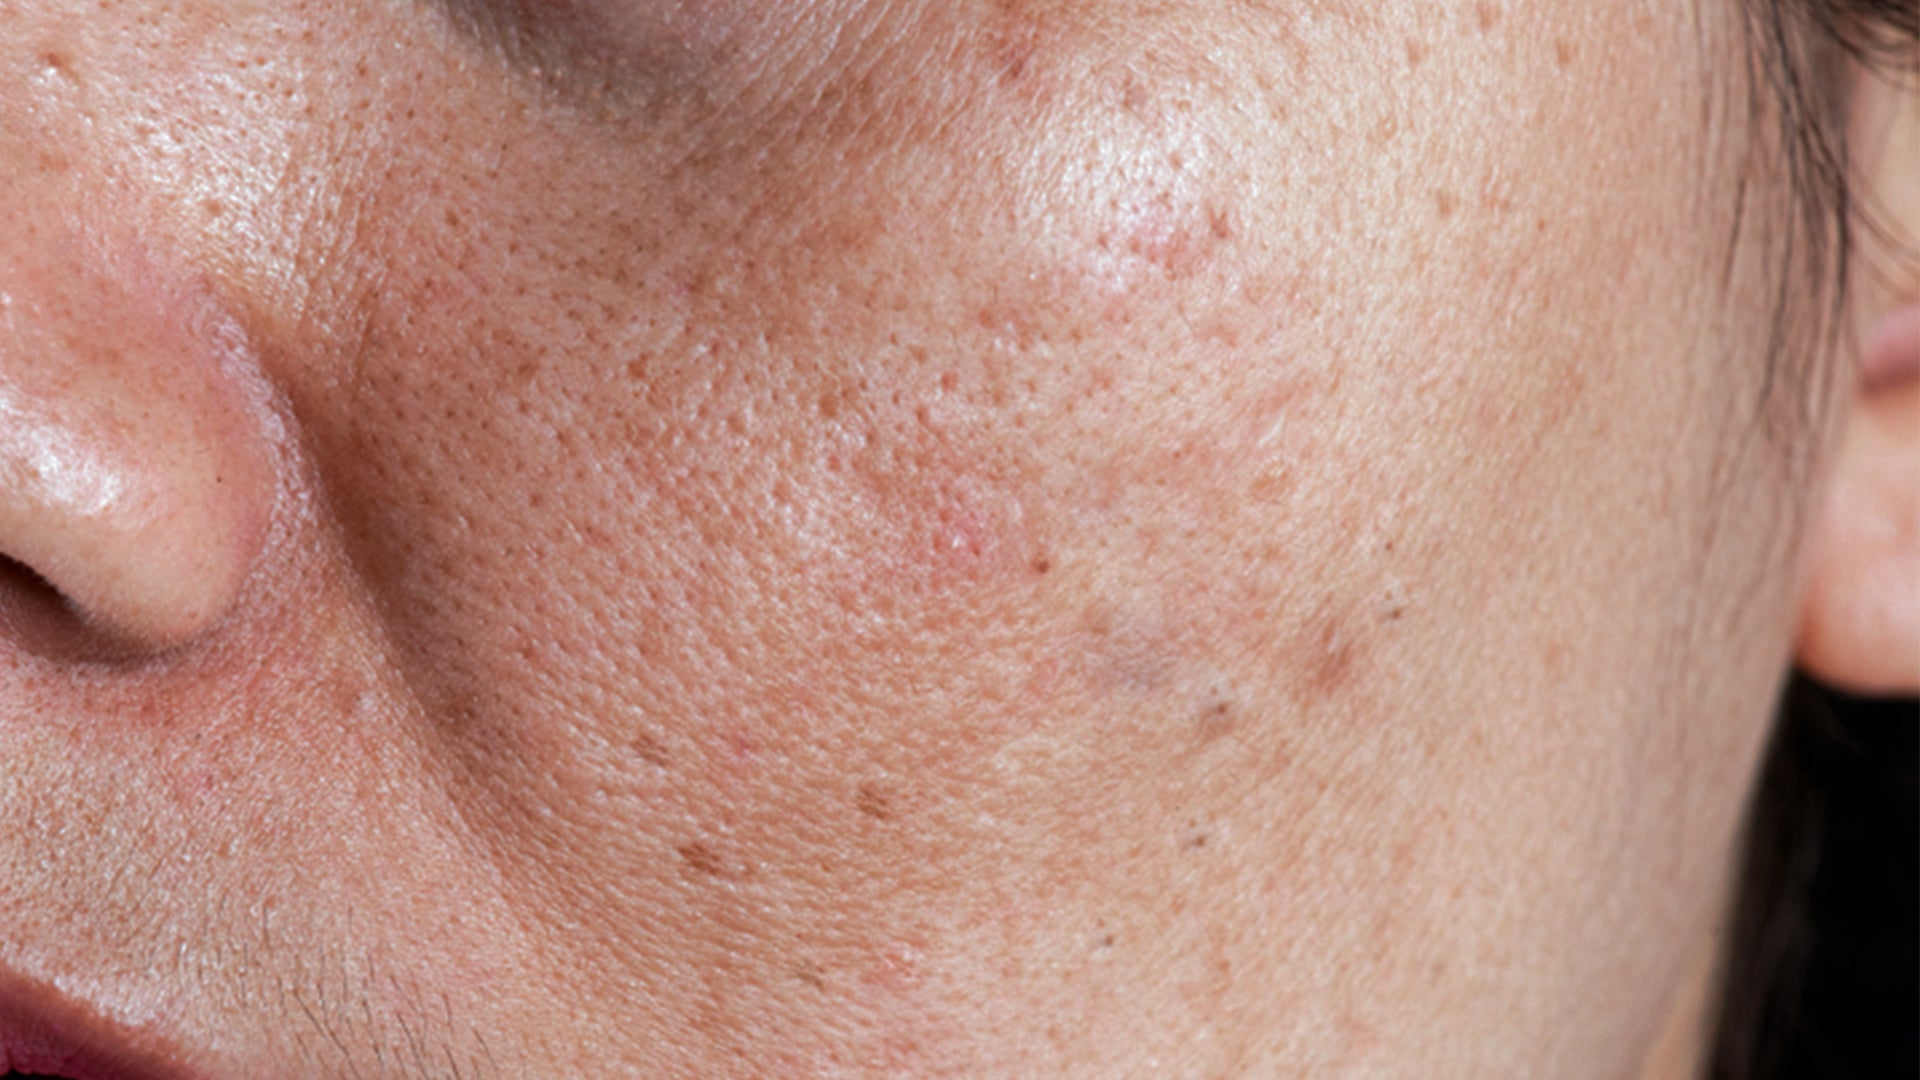  acne and pigmentation for combination skin